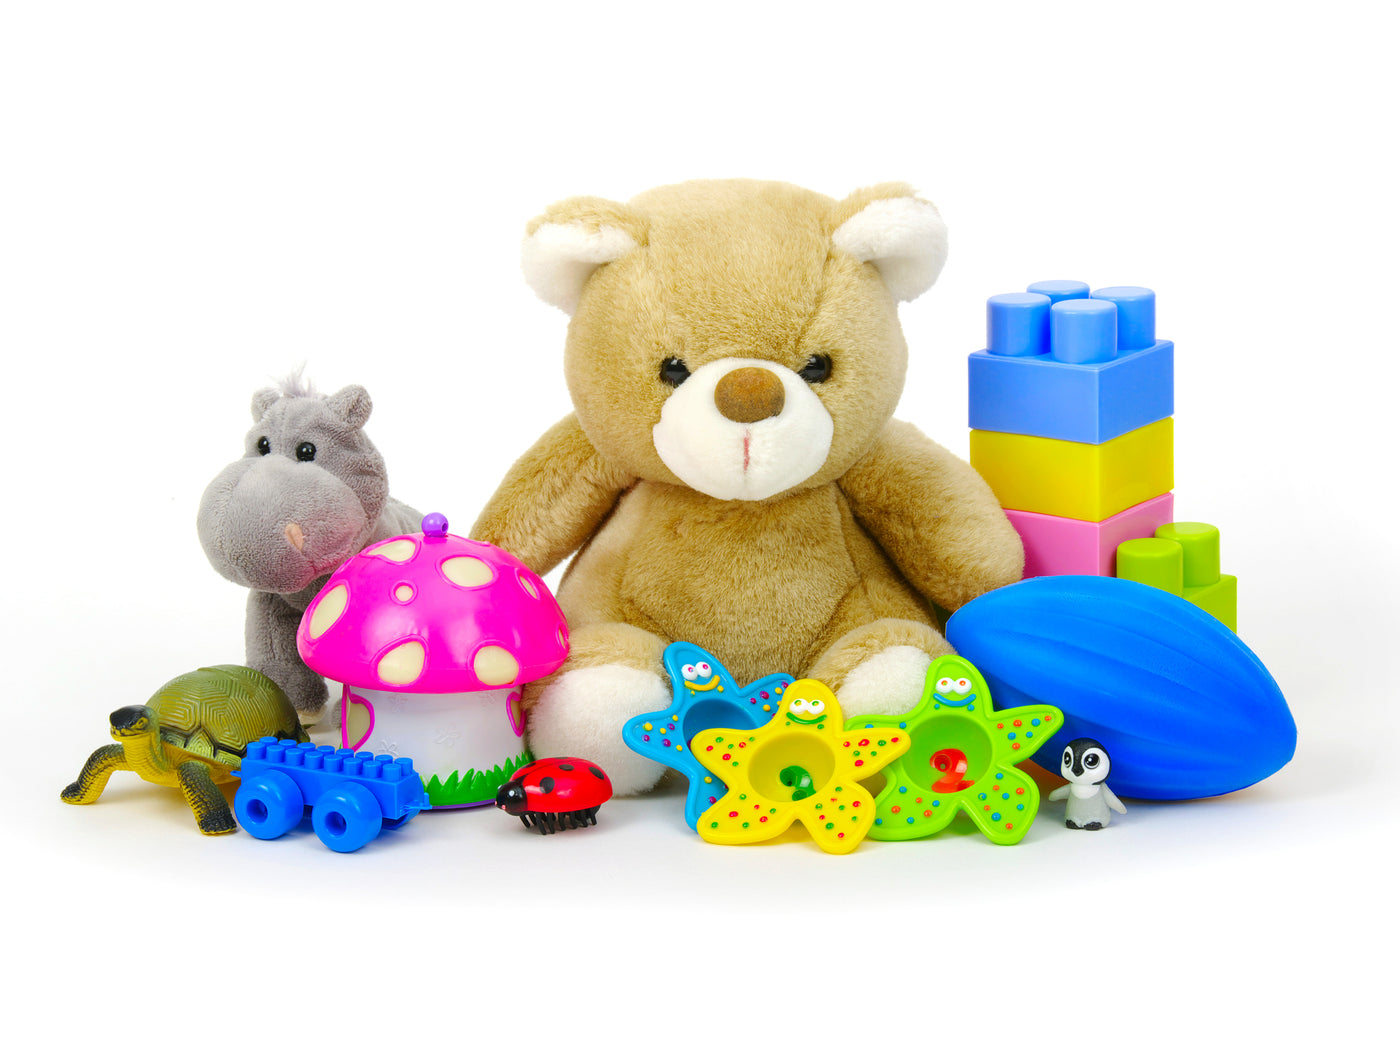 Toys For Little Ones